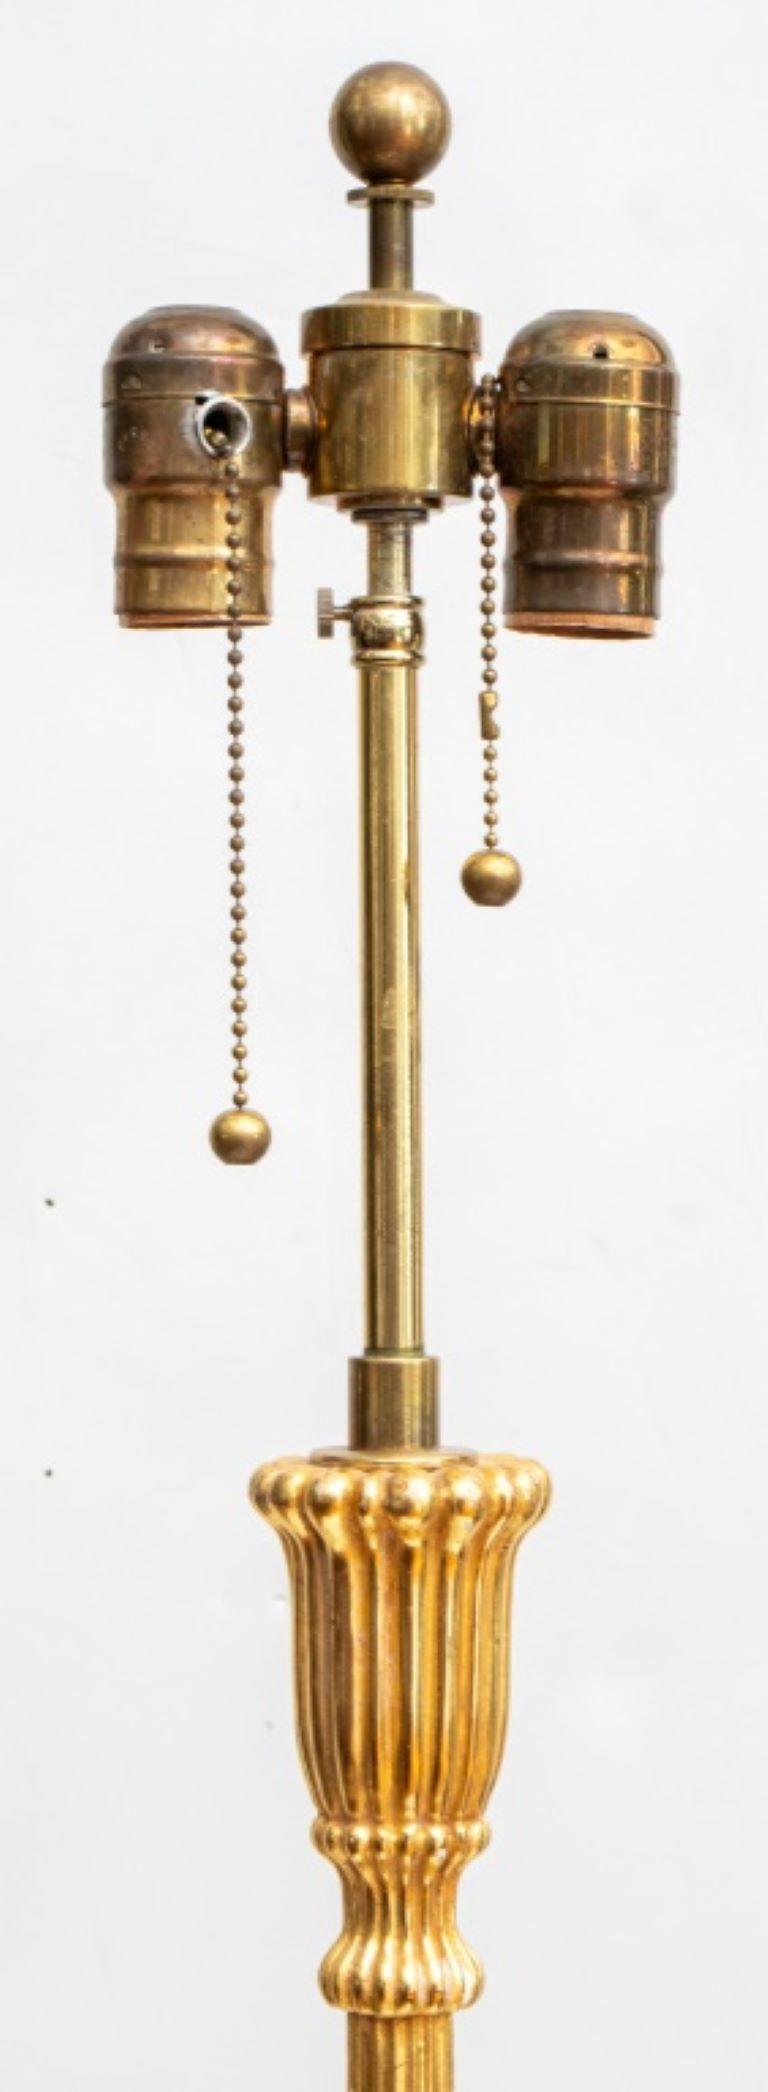 Pair of Neoclassical Style Gilt Composition Floor Lamps, late 20th century.

Dealer: S138XX